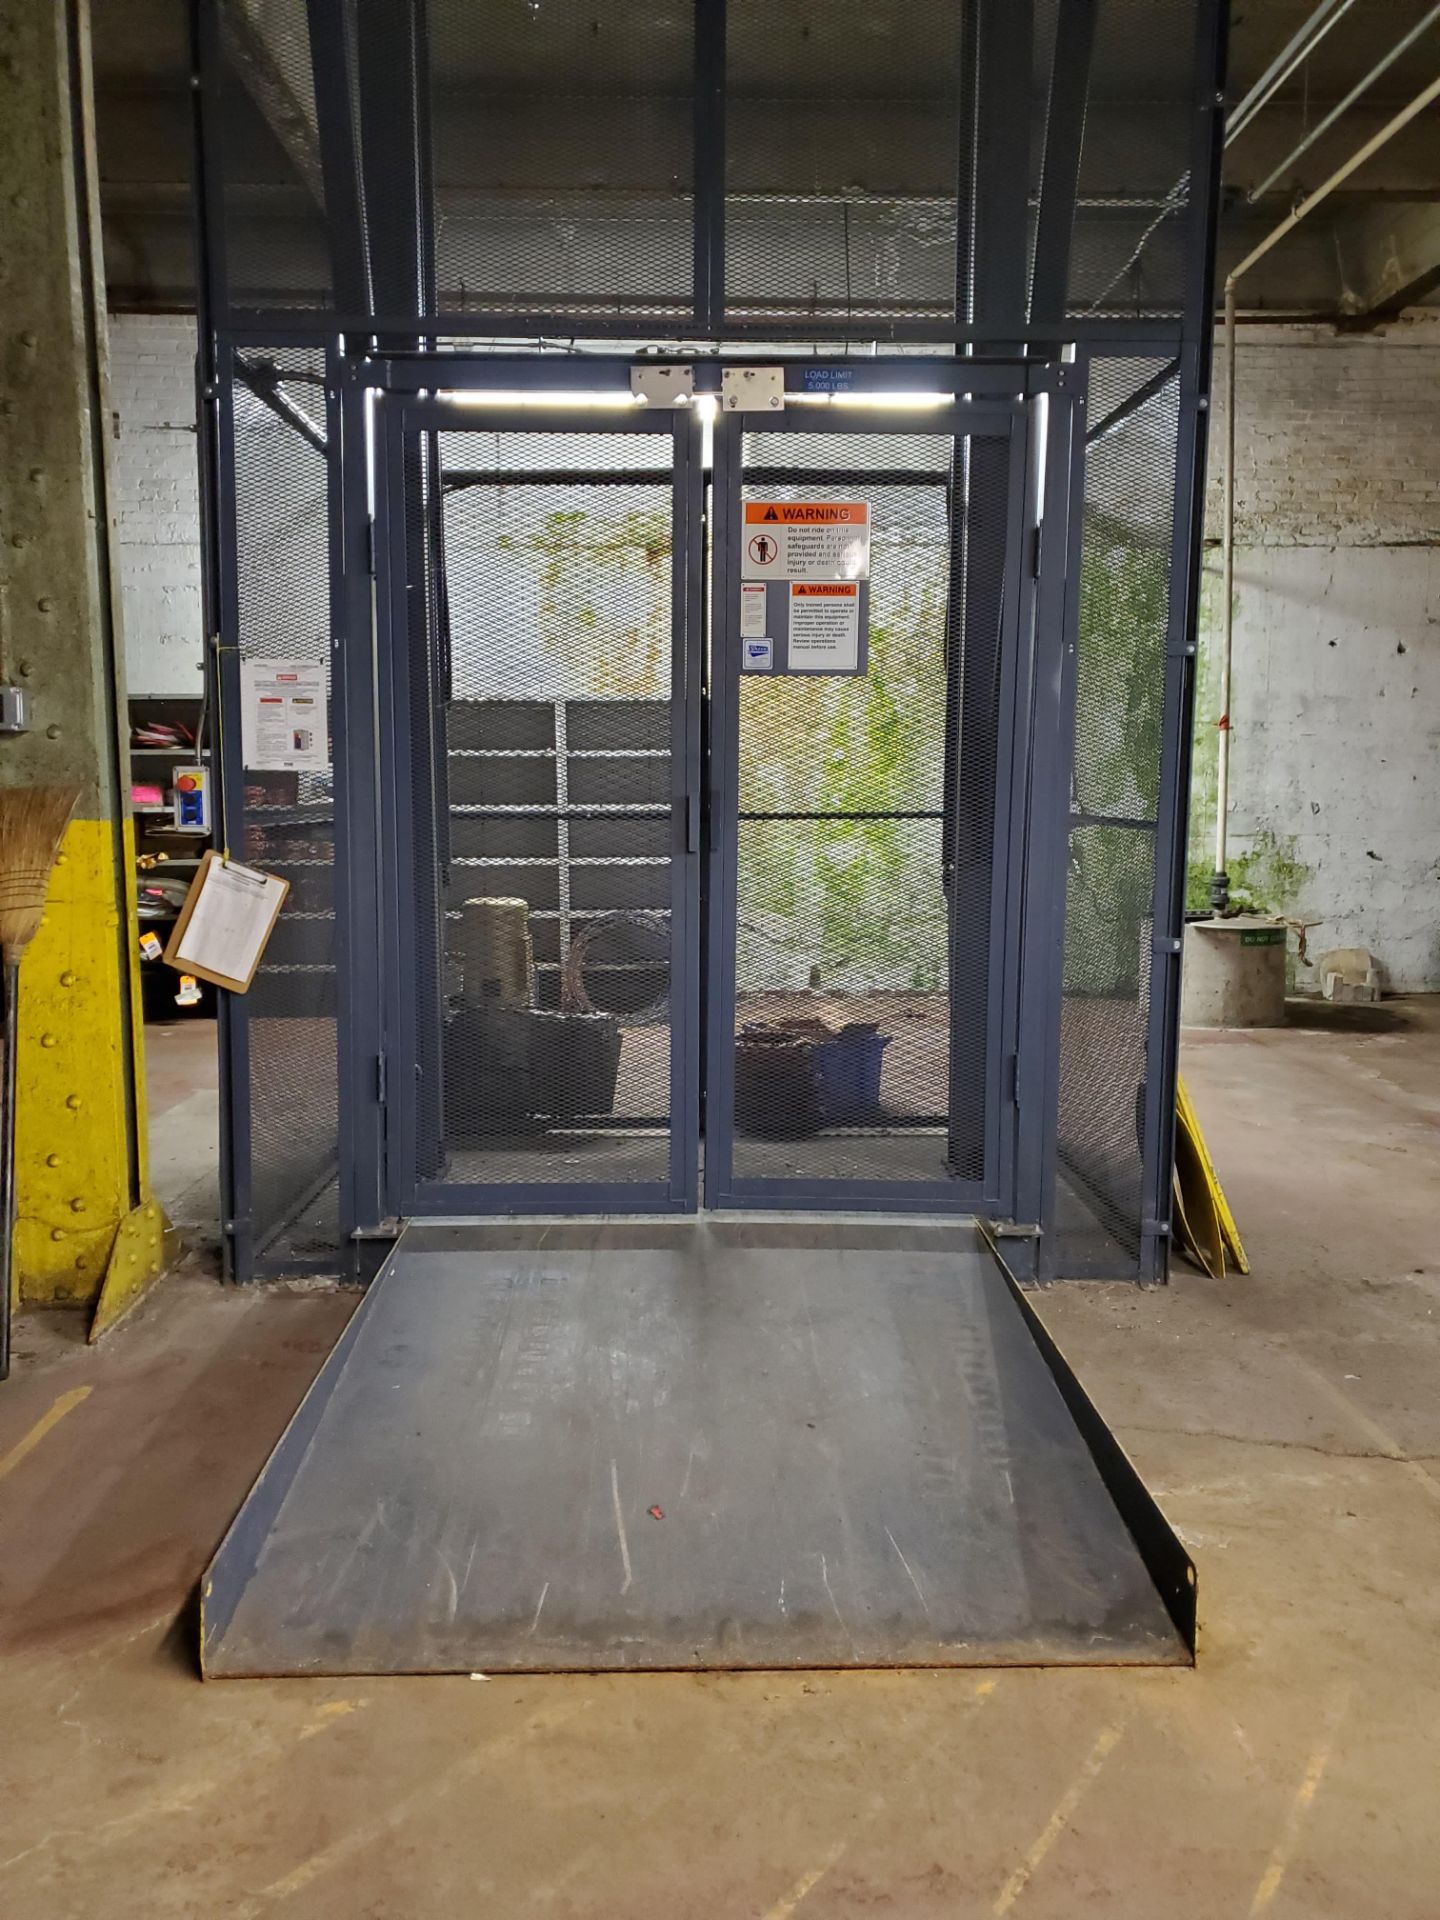 Pflow 5000 lb Vertical Equipment Lift, Series 21, with motor - Image 2 of 5